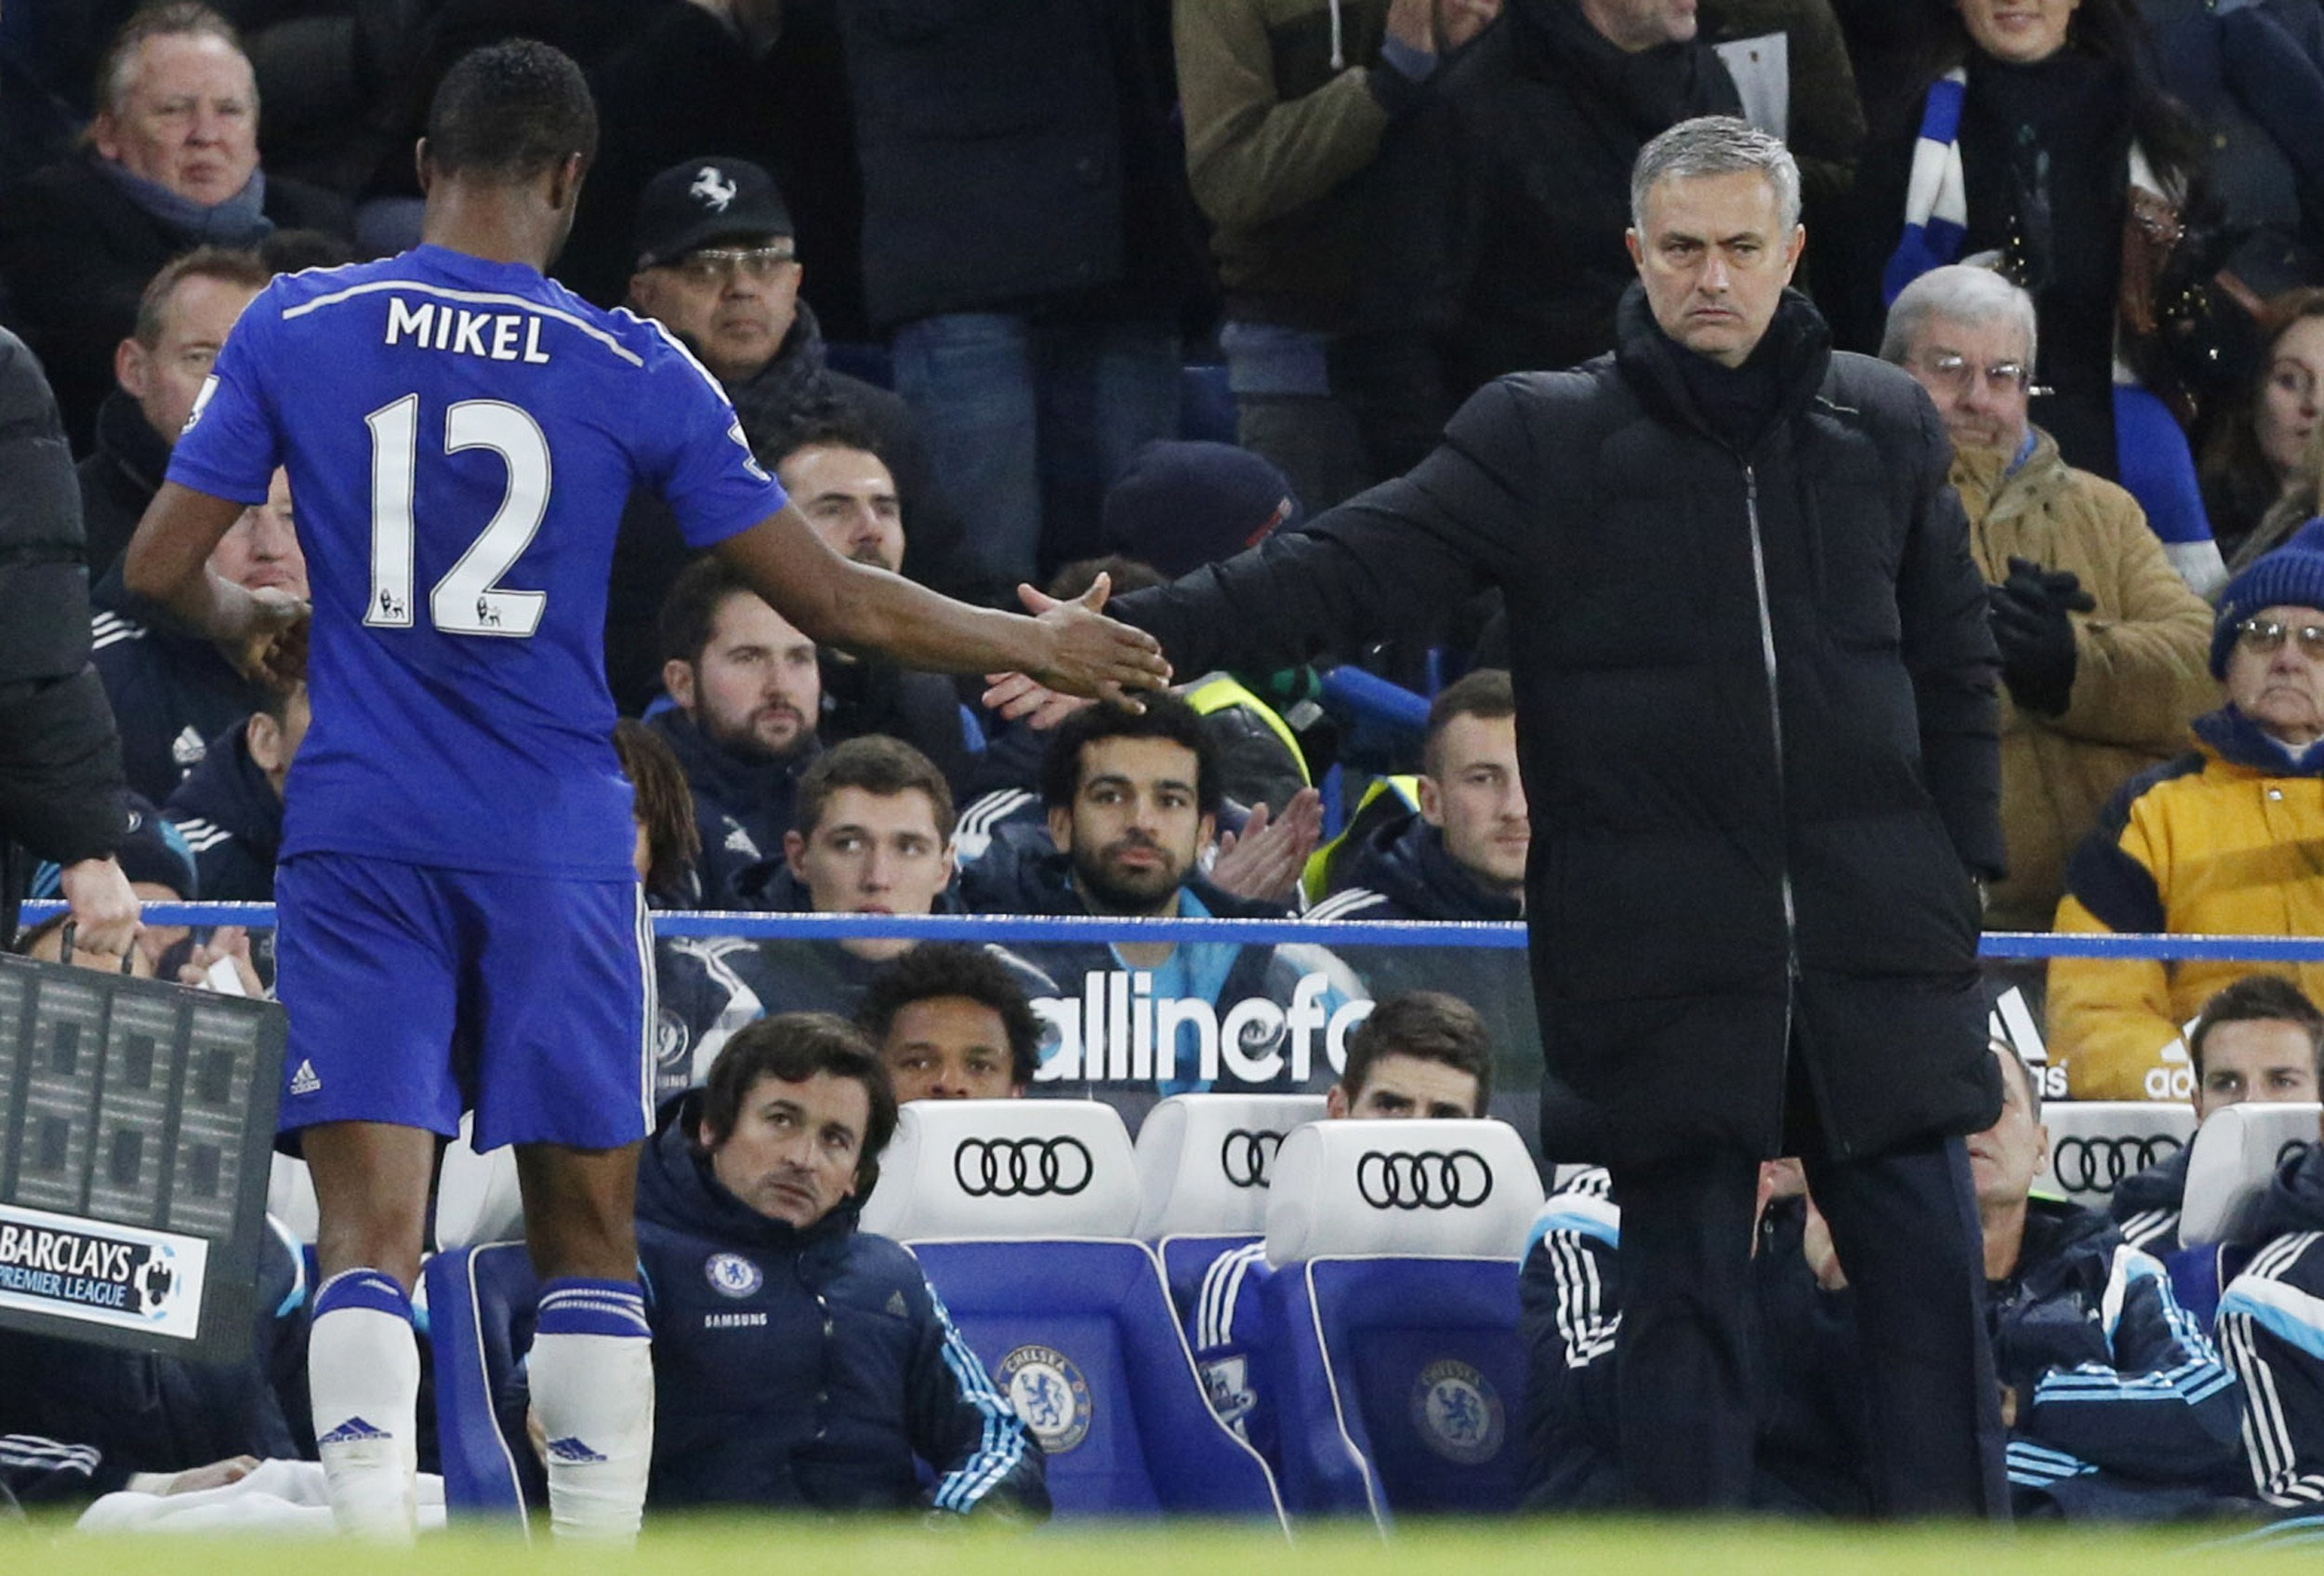 Chelsea's Nigerian midfielder John Obi Mikel (L) shakes hands with Chelsea's Portuguese manager Jose Mourinho (R) during the English Premier League football match between Chelsea and Hull City at Stamford Bridge in London on December 13, 2014. AFP PHOTO / JUSTIN TALLIS

RESTRICTED TO EDITORIAL USE. No use with unauthorized audio, video, data, fixture lists, club/league logos or live services. Online in-match use limited to 45 images, no video emulation. No use in betting, games or single club/league/player publications.        (Photo credit should read JUSTIN TALLIS/AFP/Getty Images)